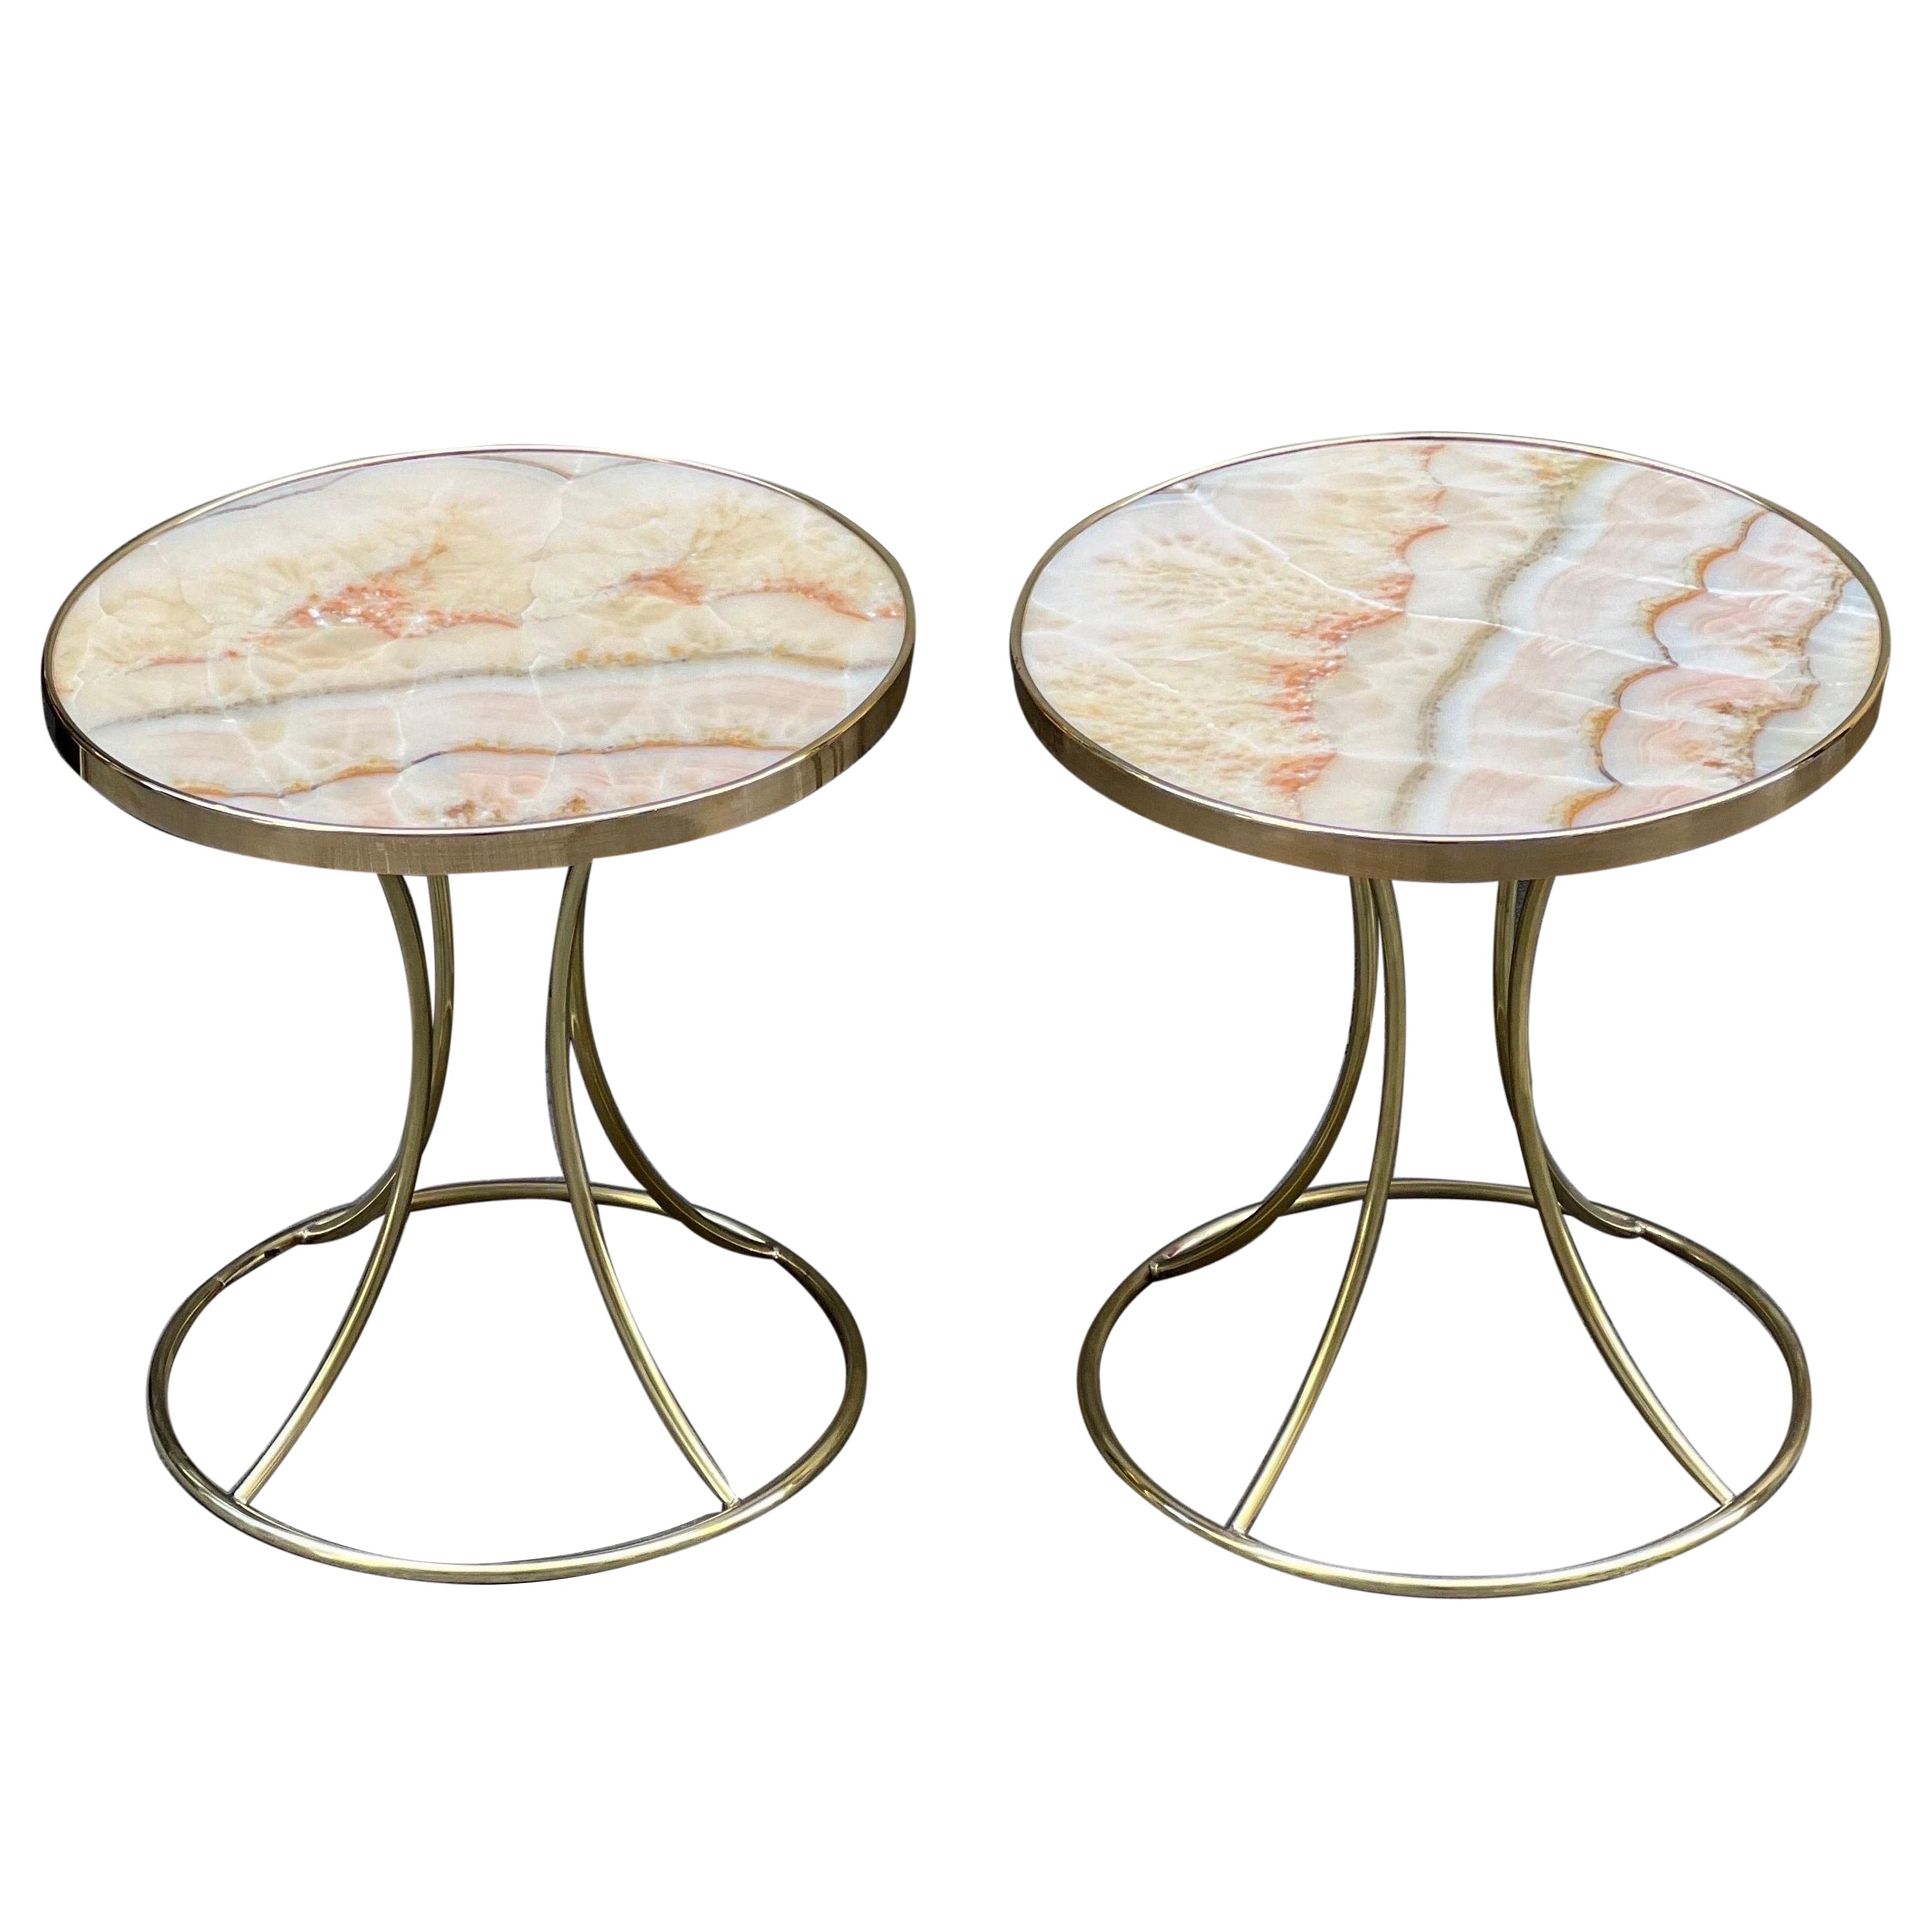 Pair of Vintage Italian Round Pink Onyx and Brass Tables, 1980